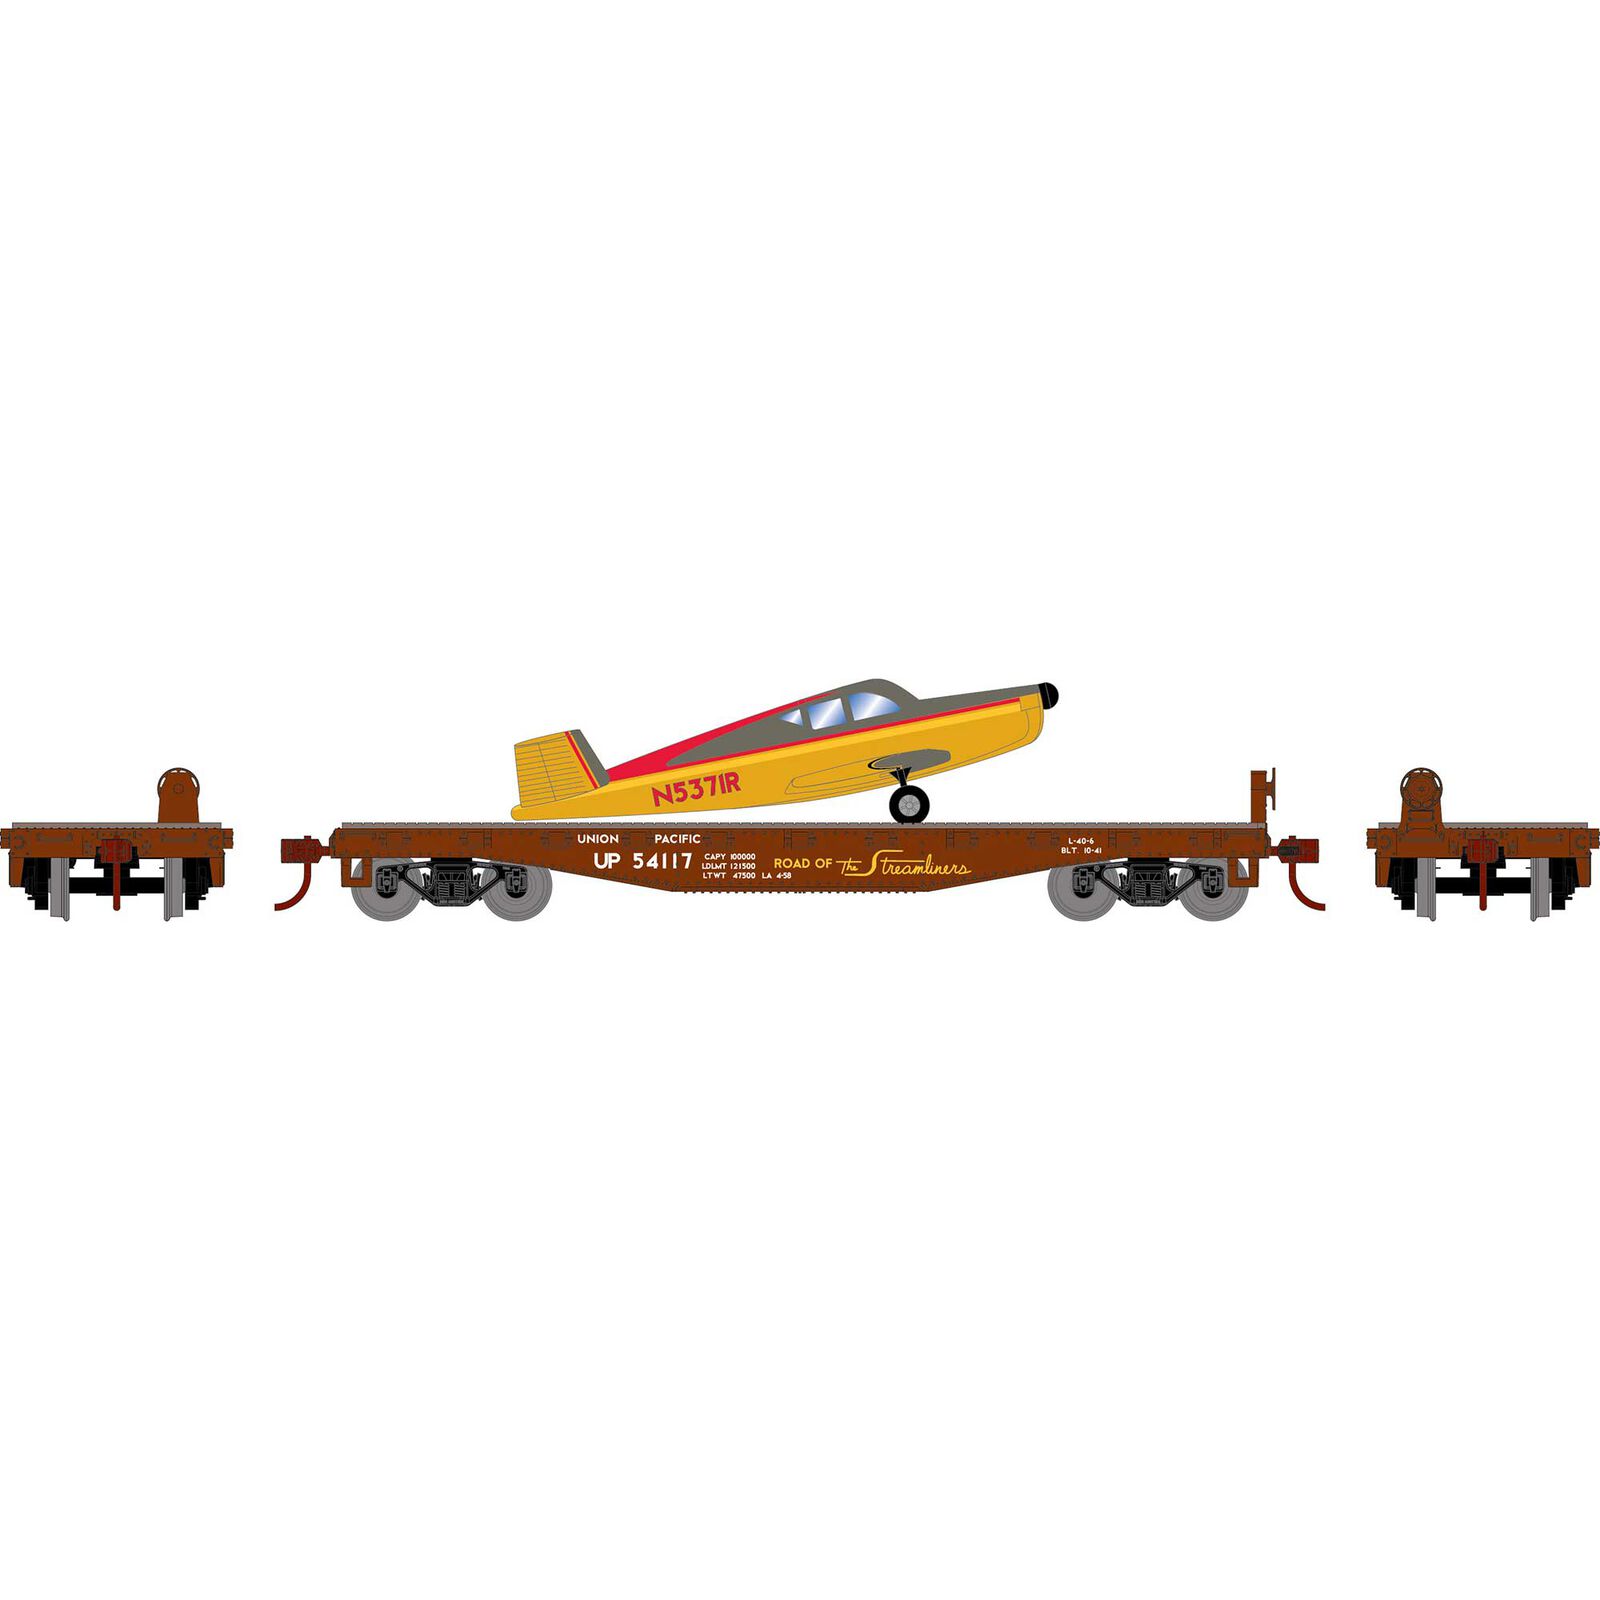 HO 40' Flat Car with Plane, UP # 54117